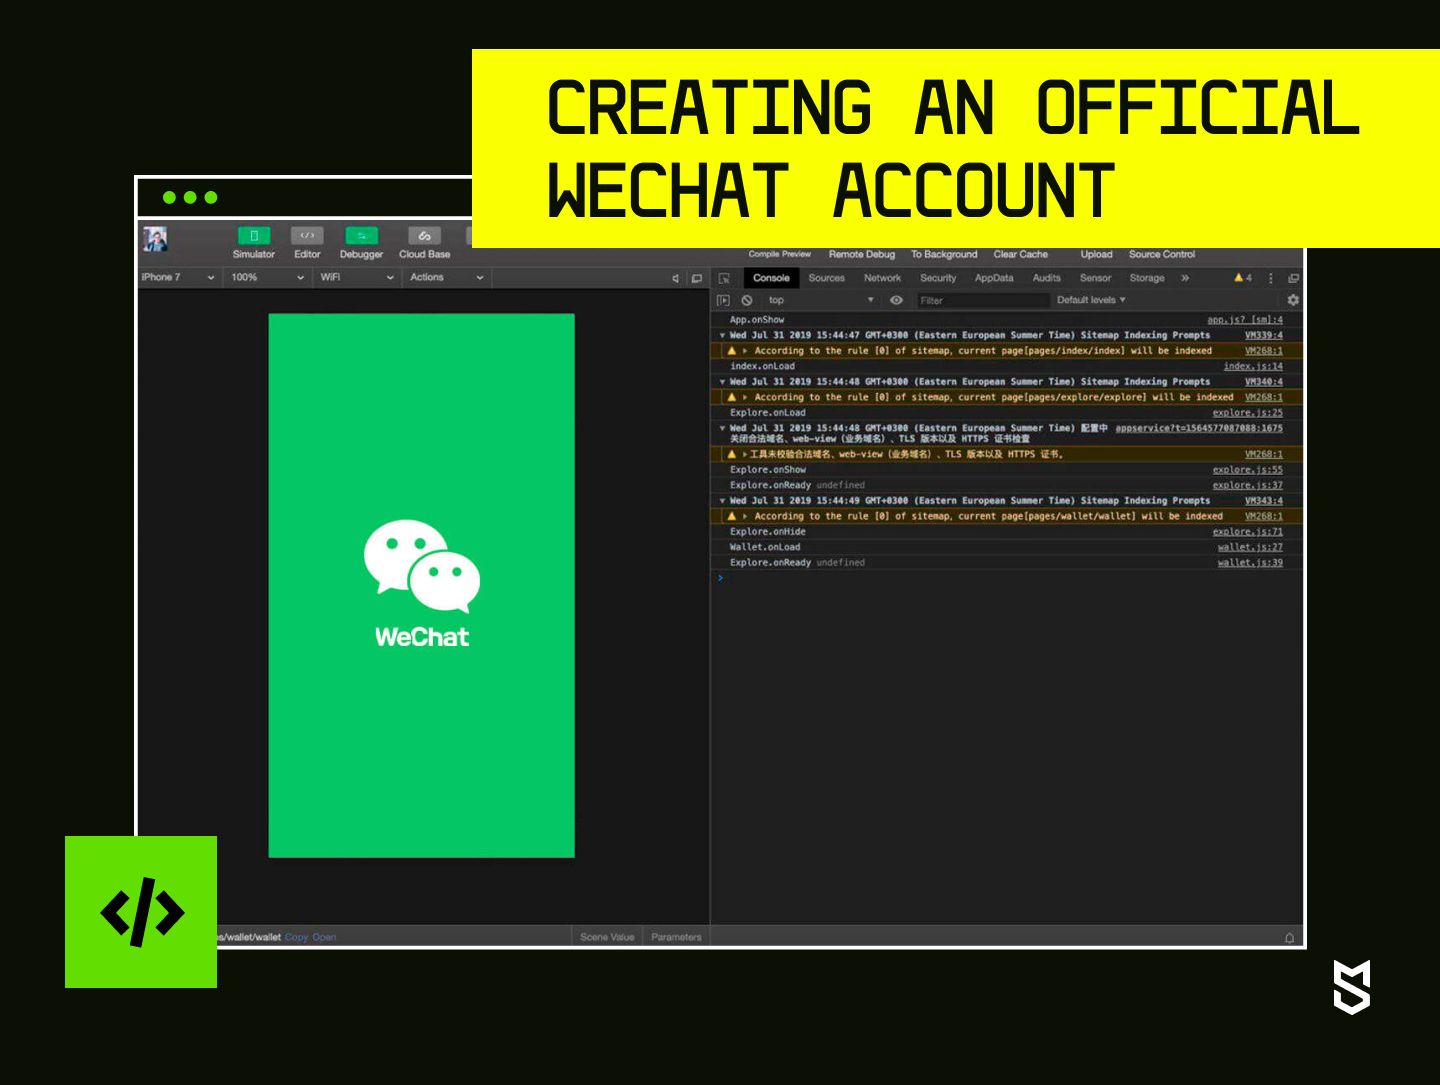 Creating an official WeChat account